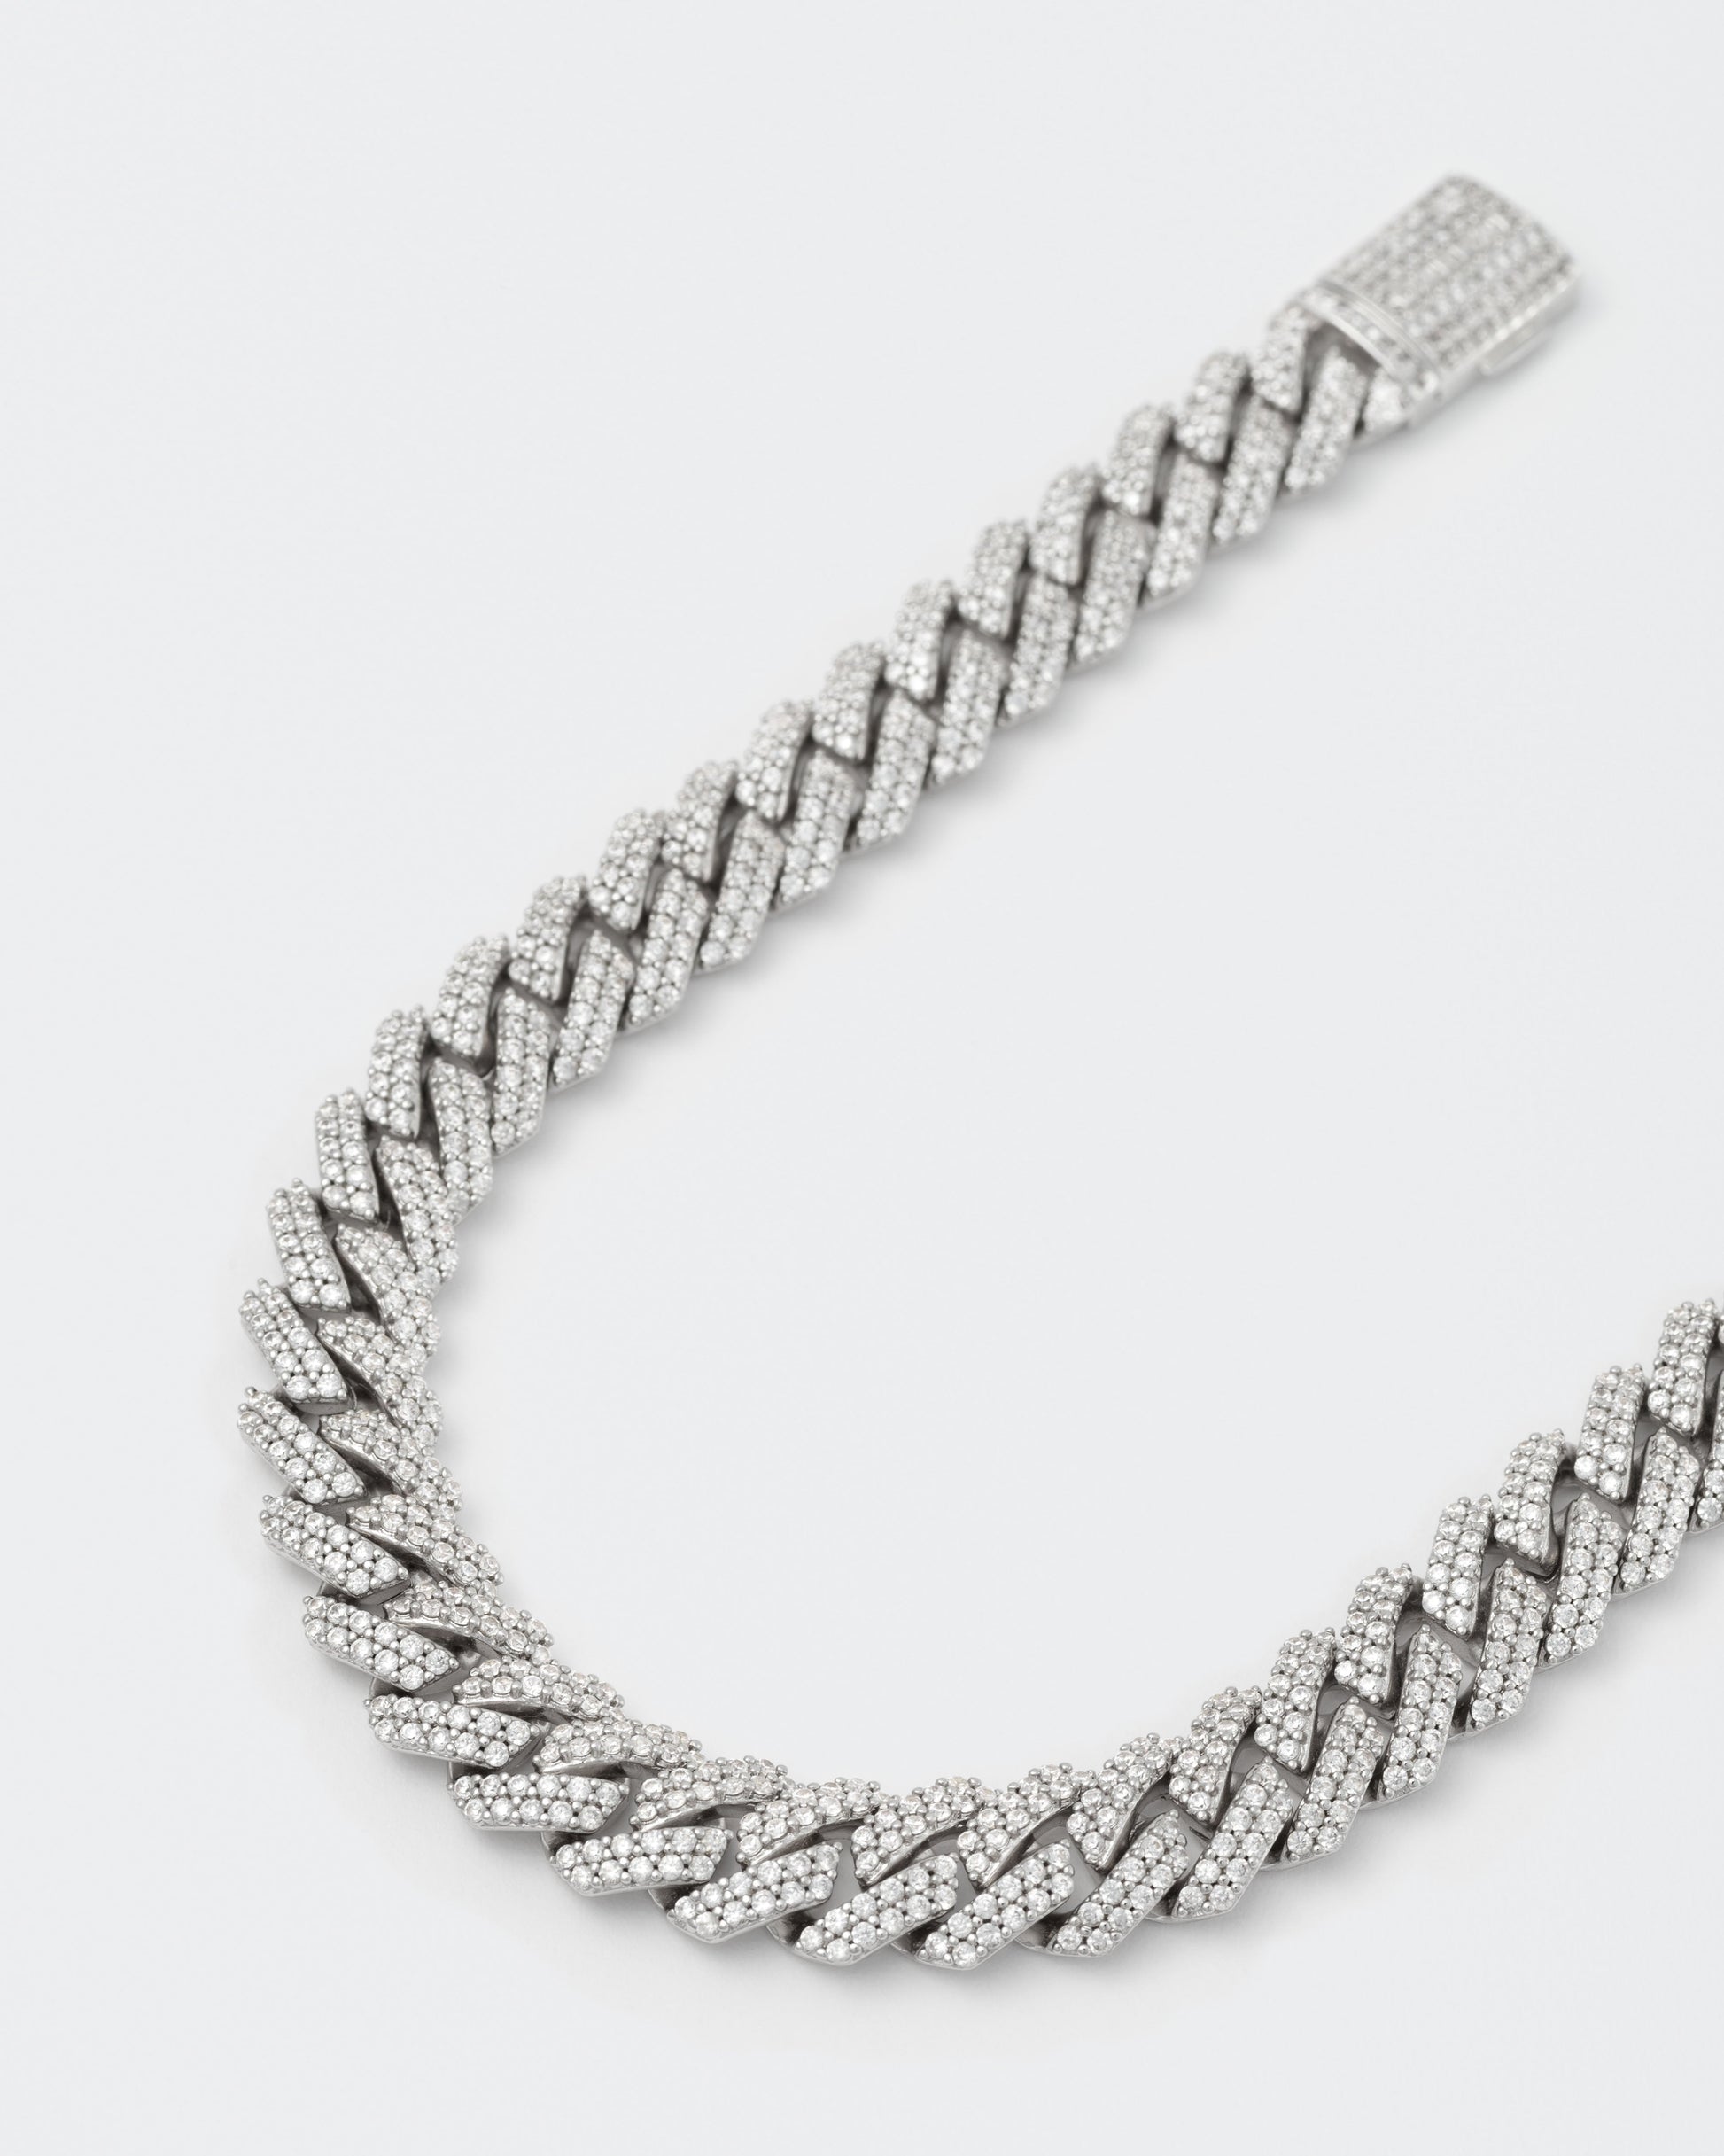 detail of 8k white gold coated mini prong chain bracelet with hand-set micropavé stones in white